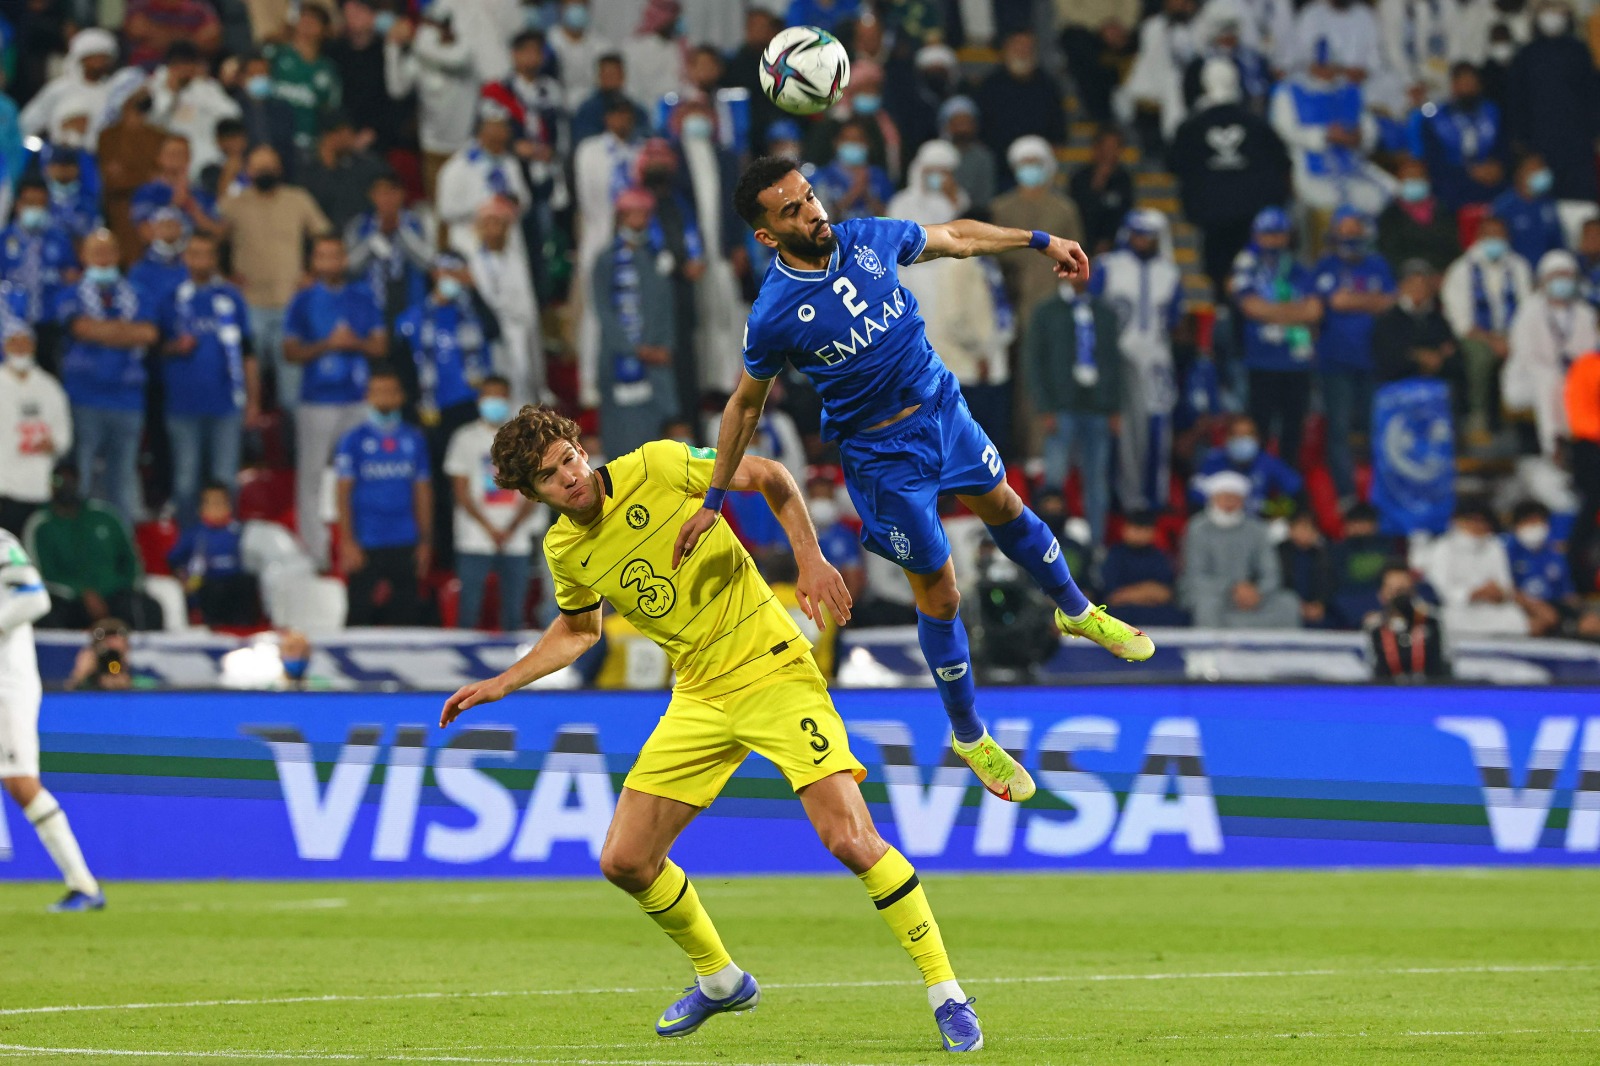 ABU DHABI: Hilal's defender Mohammed Al-Breik (right) vies for the ball with Chelsea's defender Marcos Alonso during the 2021 FIFA Club World Cup semifinal match at Mohammed Bin Zayed stadium yesterday. – AFP